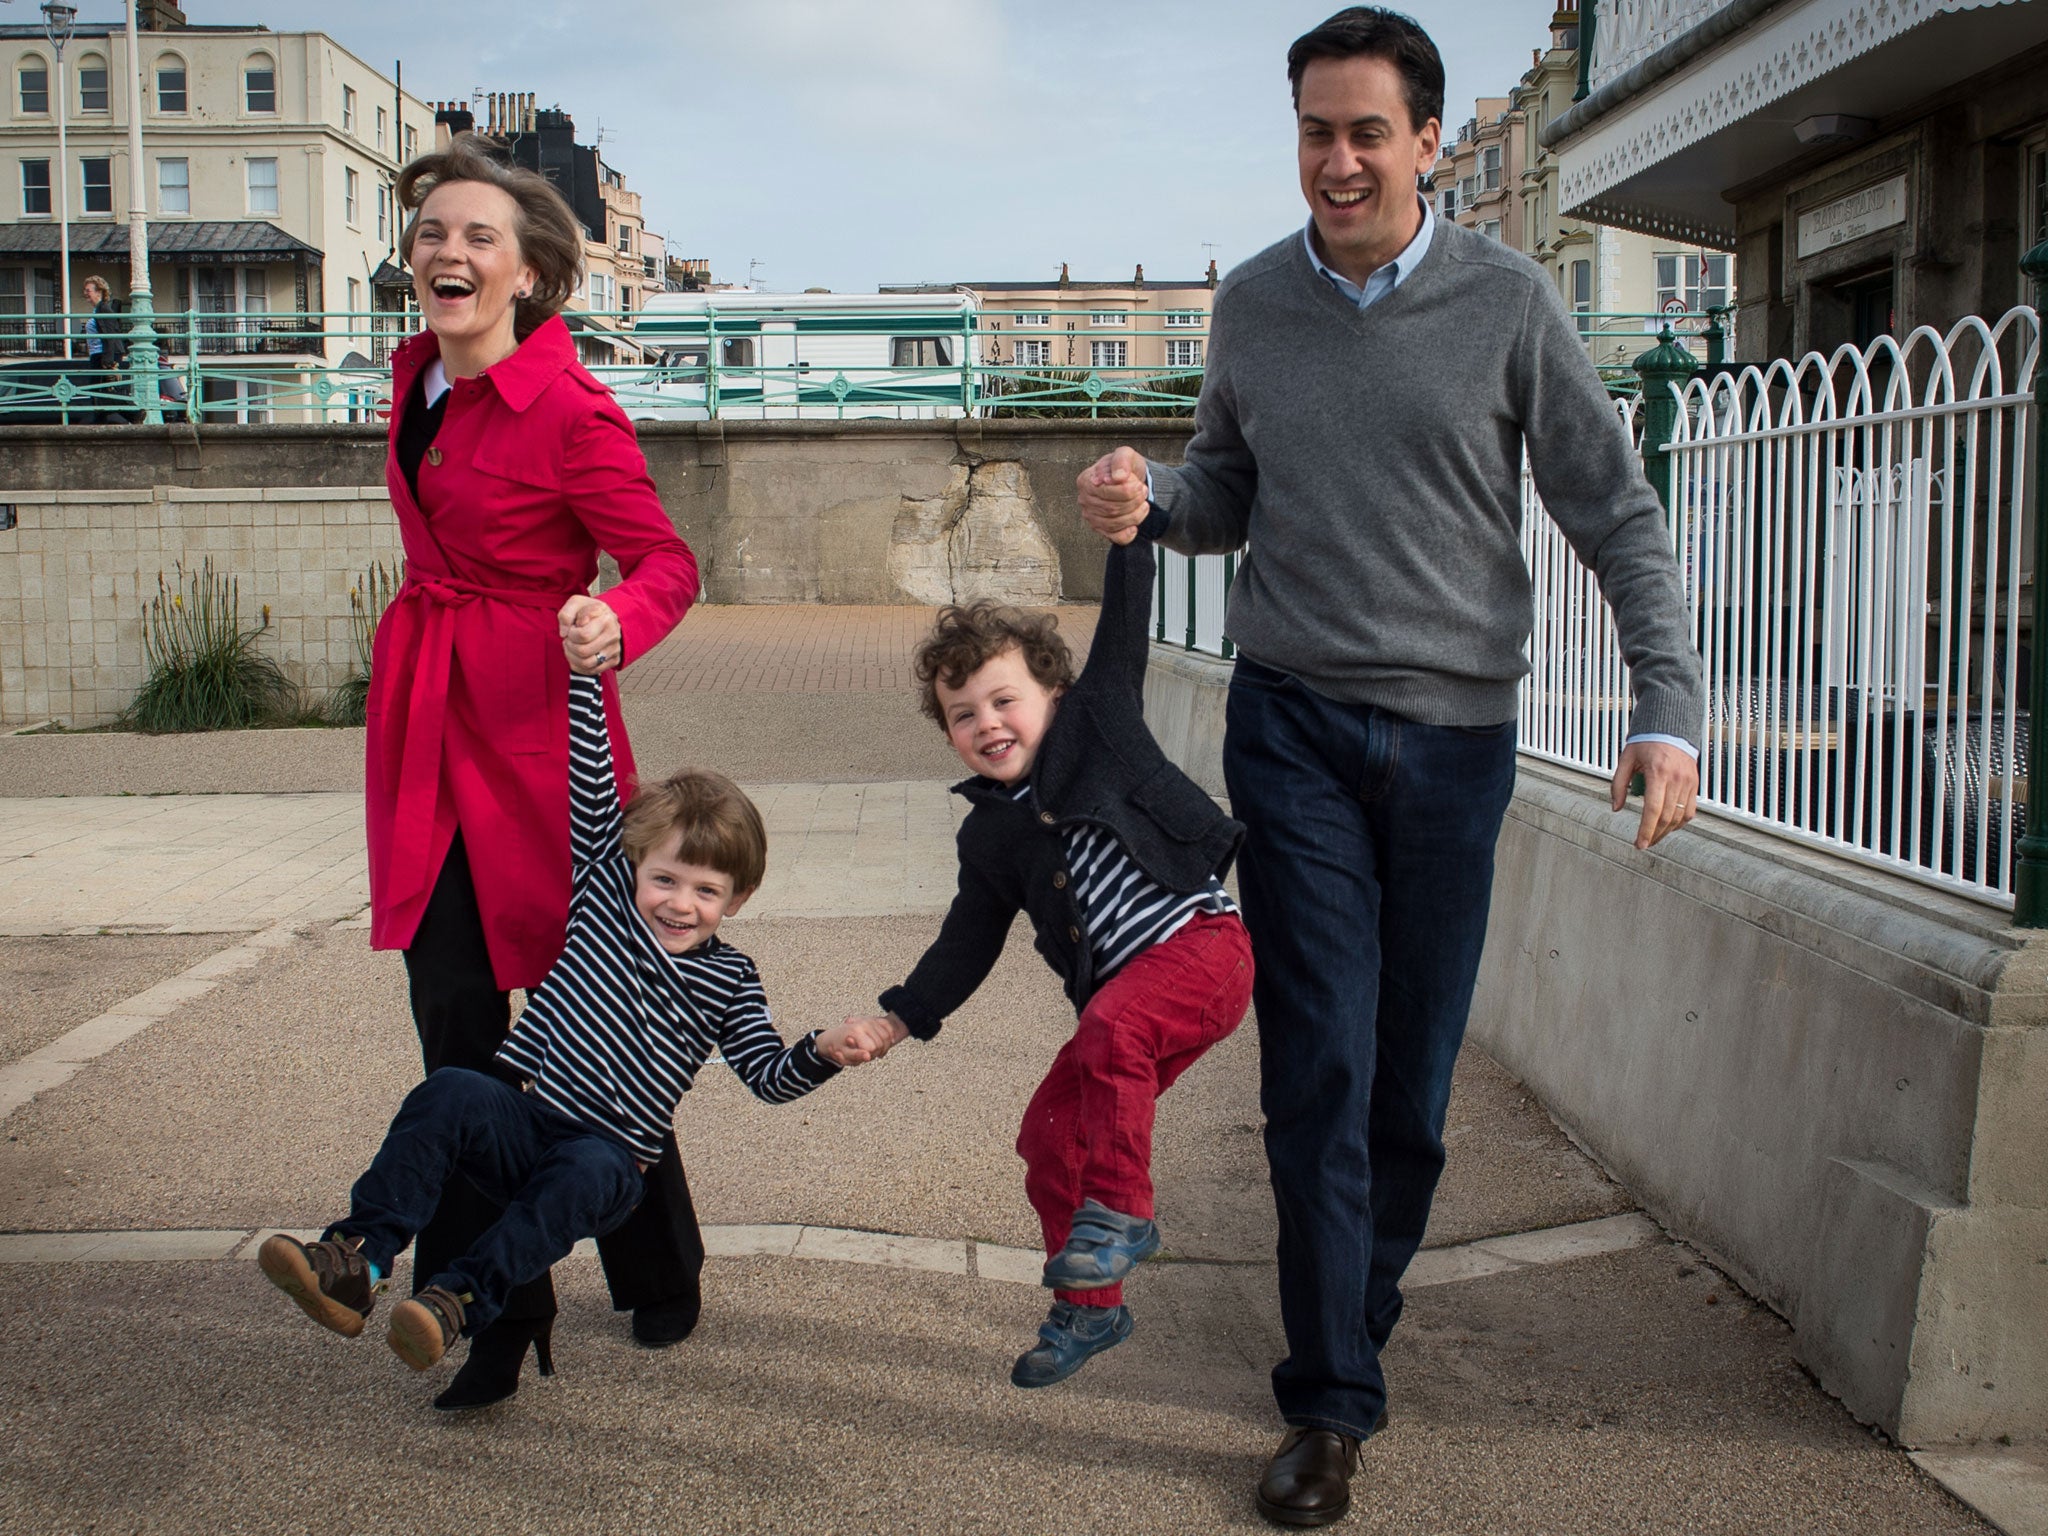 The Milibands